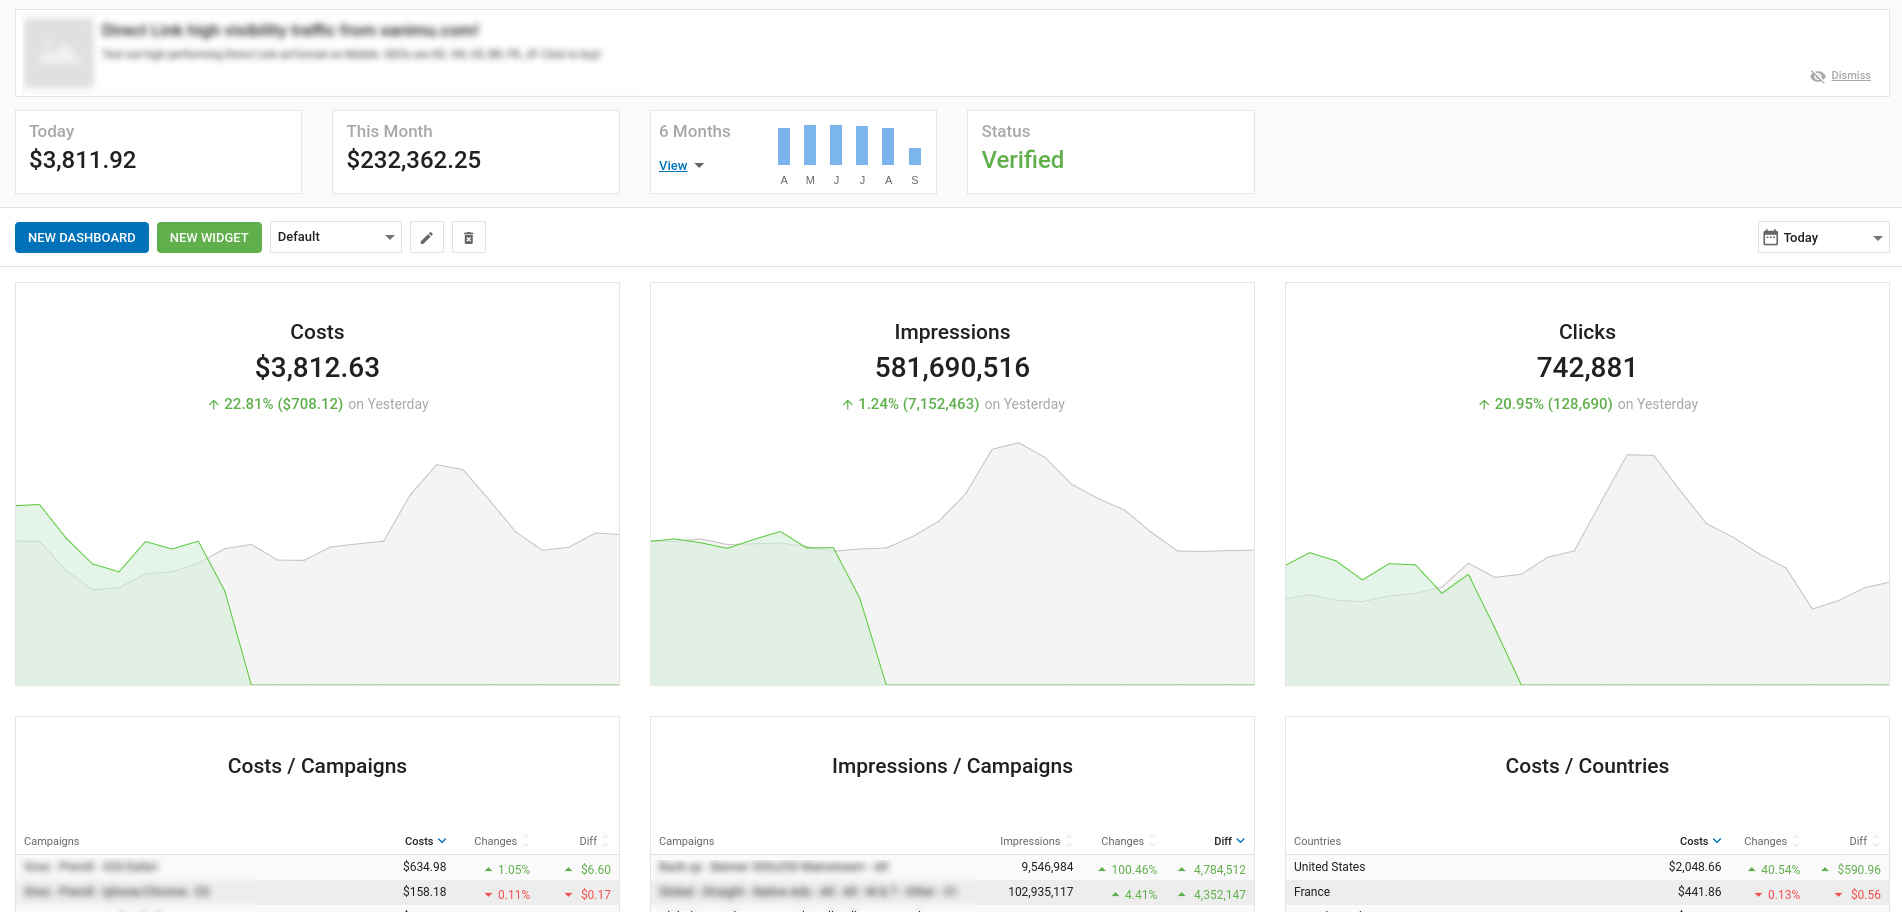 Advertiser overview for customized dashboards